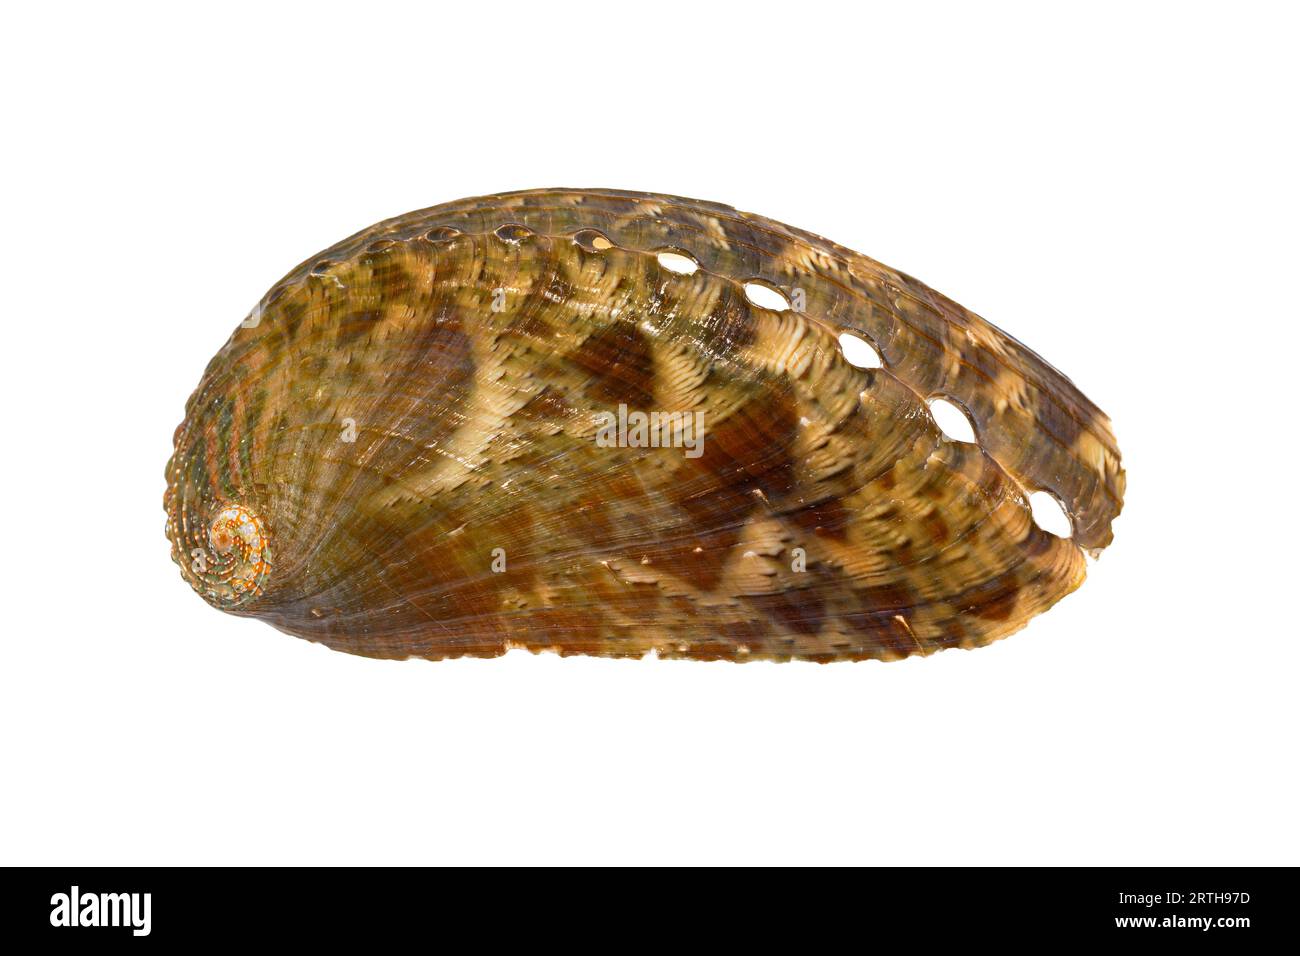 Haliotis asinina, (Ass's/Donkey's Ear Abalone) tropical gastropod mollusk from Indo-Pacific sea (subtidal, shallow water) Stock Photo